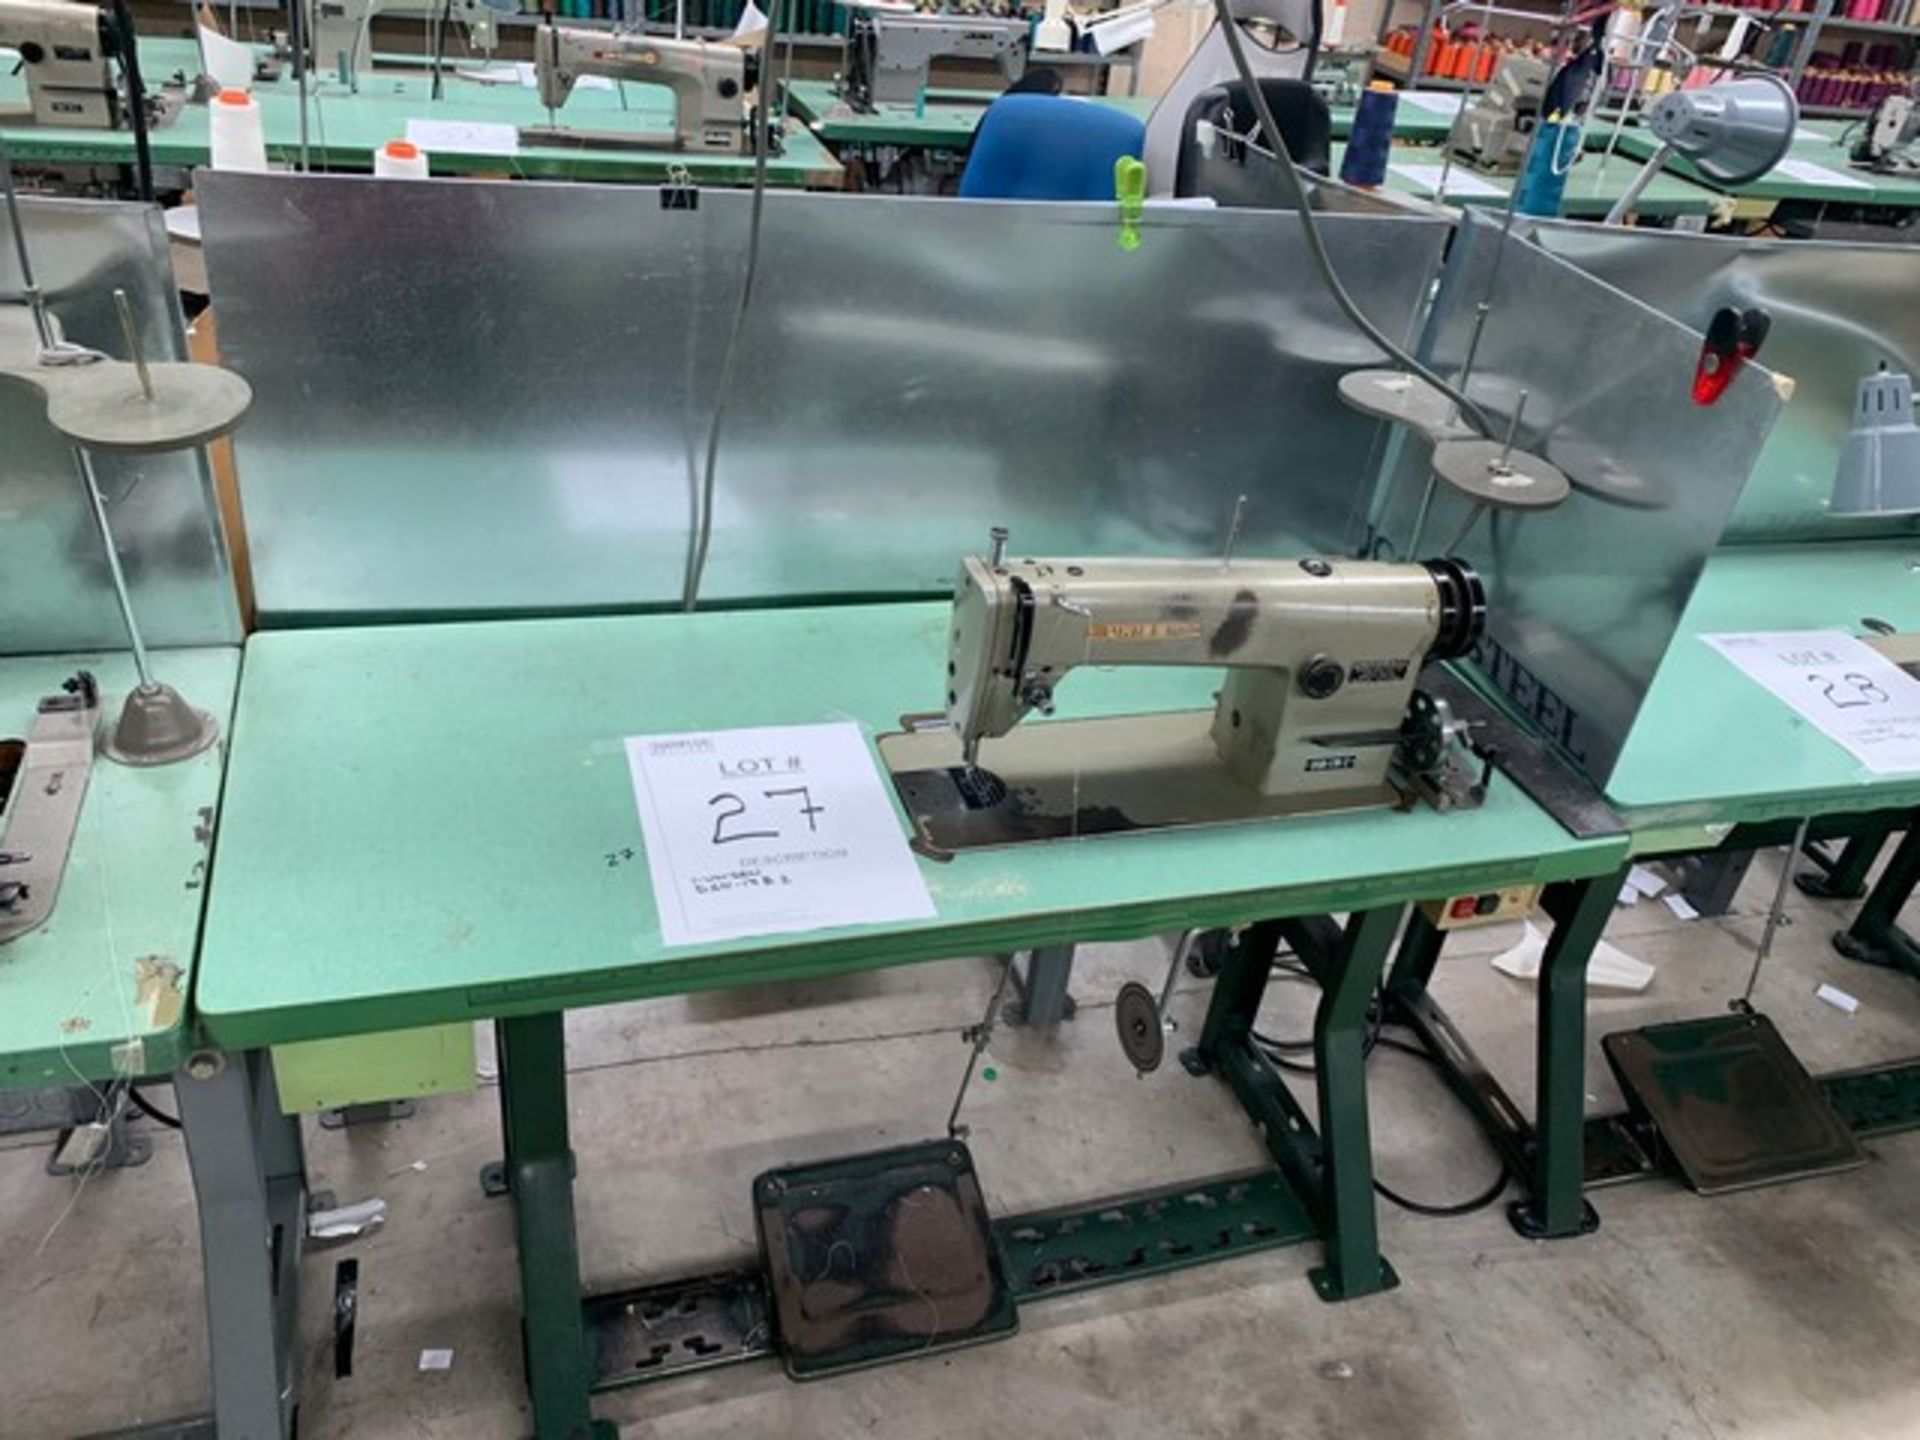 UNISEW DSN-178-2 SEWING MACHINE WITH MOTOR & STAND